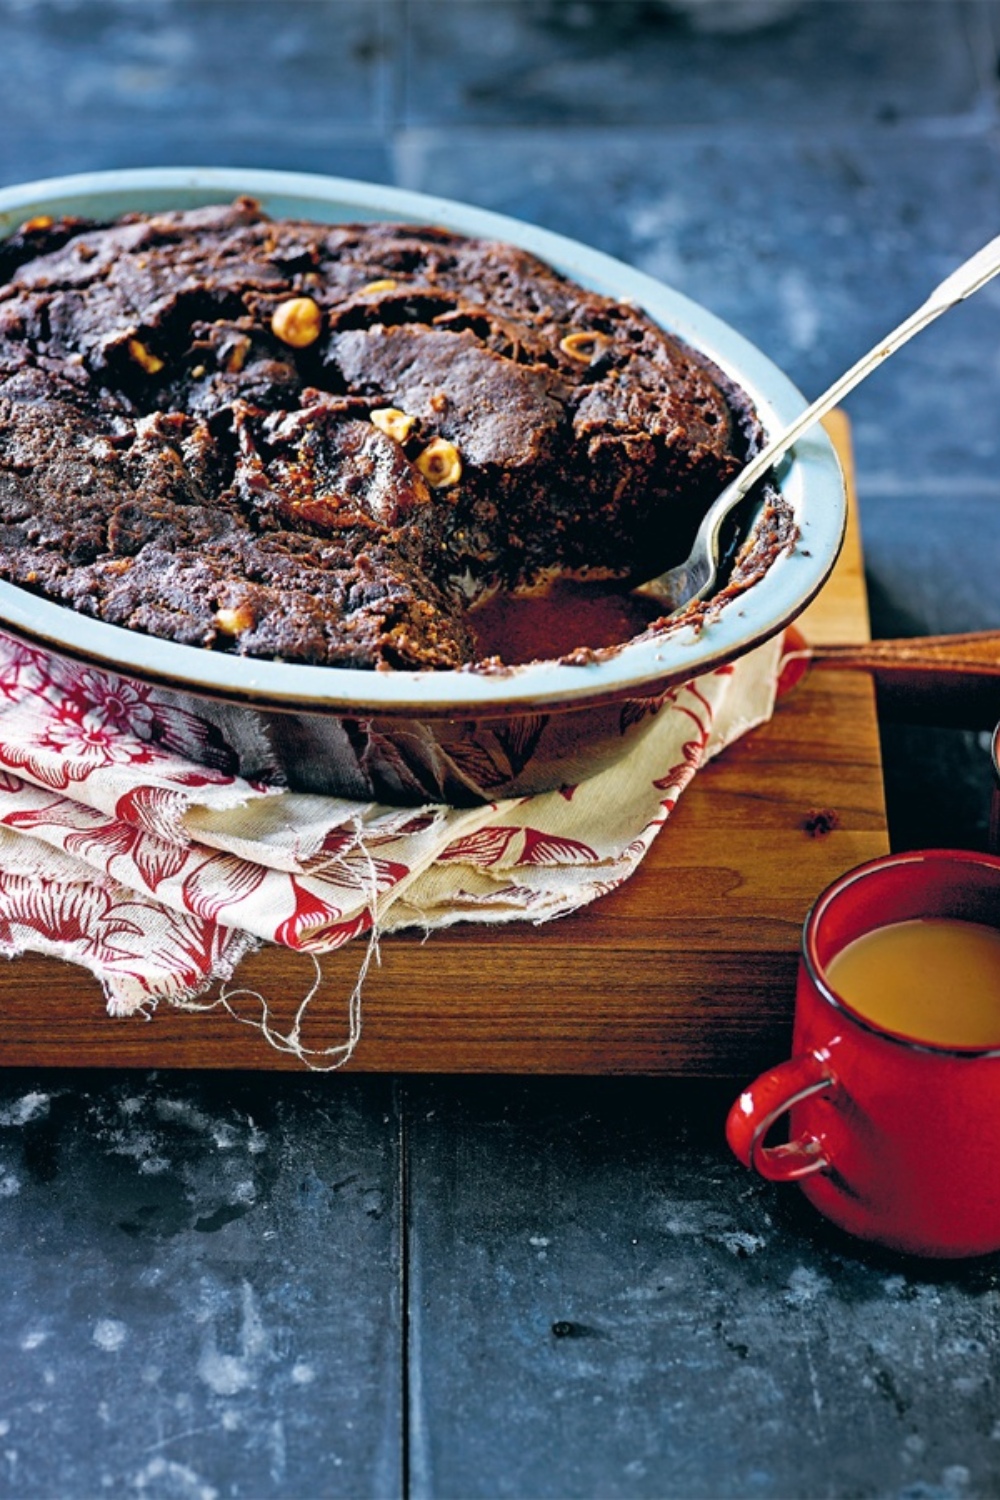 Chocolate Self Saucing Pudding in a slow cooker dish with a red mug of tea.